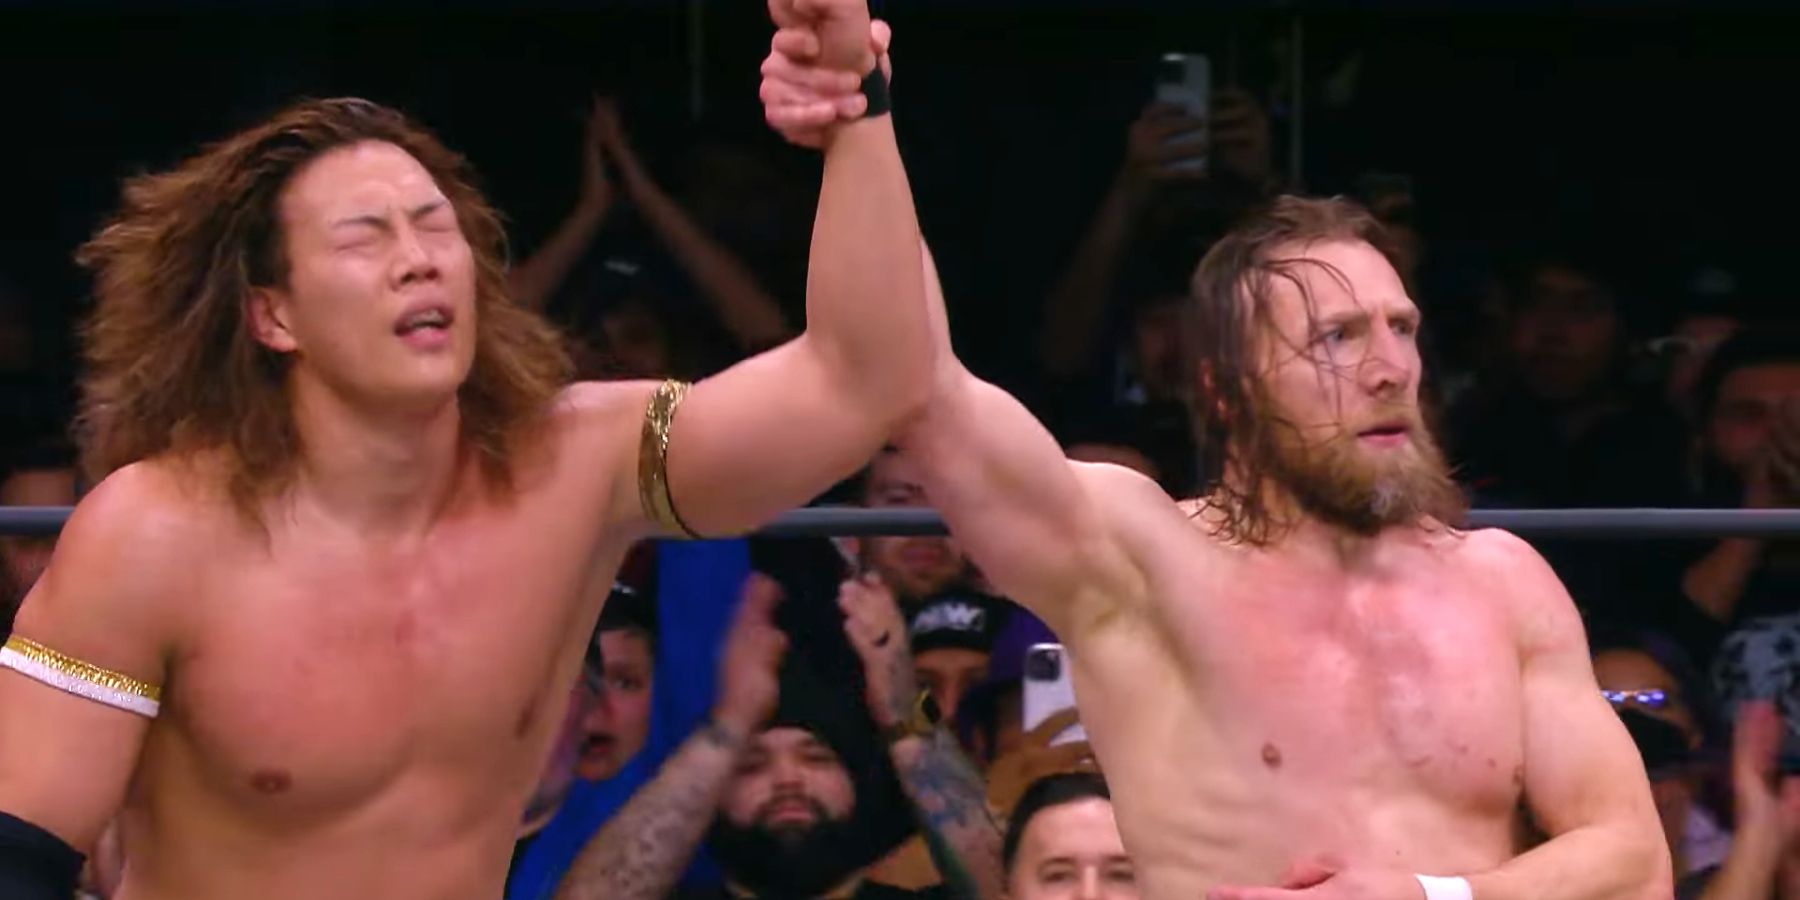 Bryan Danielson raises Konosuke Takeshita's hand after the two had a fantastic match on the January 11 episode of AEW Dynamite.